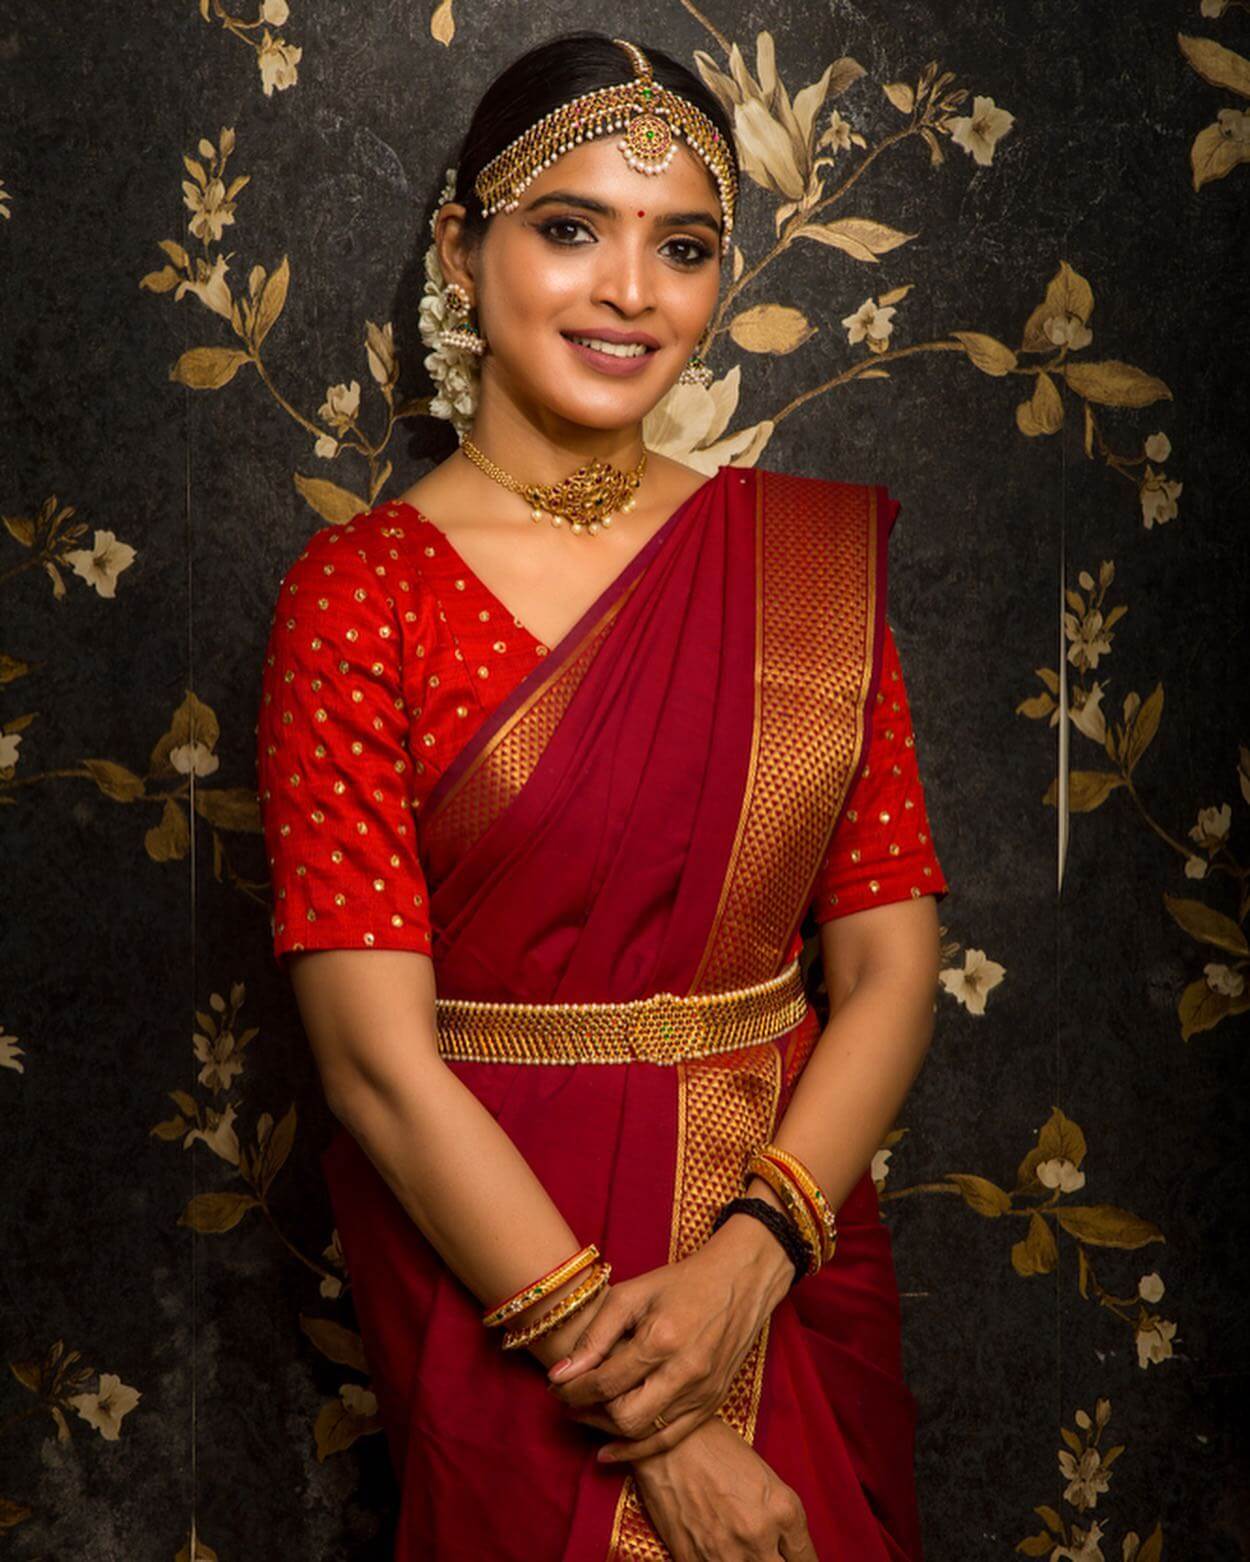 Sanchita Shetty Traditional South Indian Saree Look In Maroon Saree With Heavy Gold Jewellery